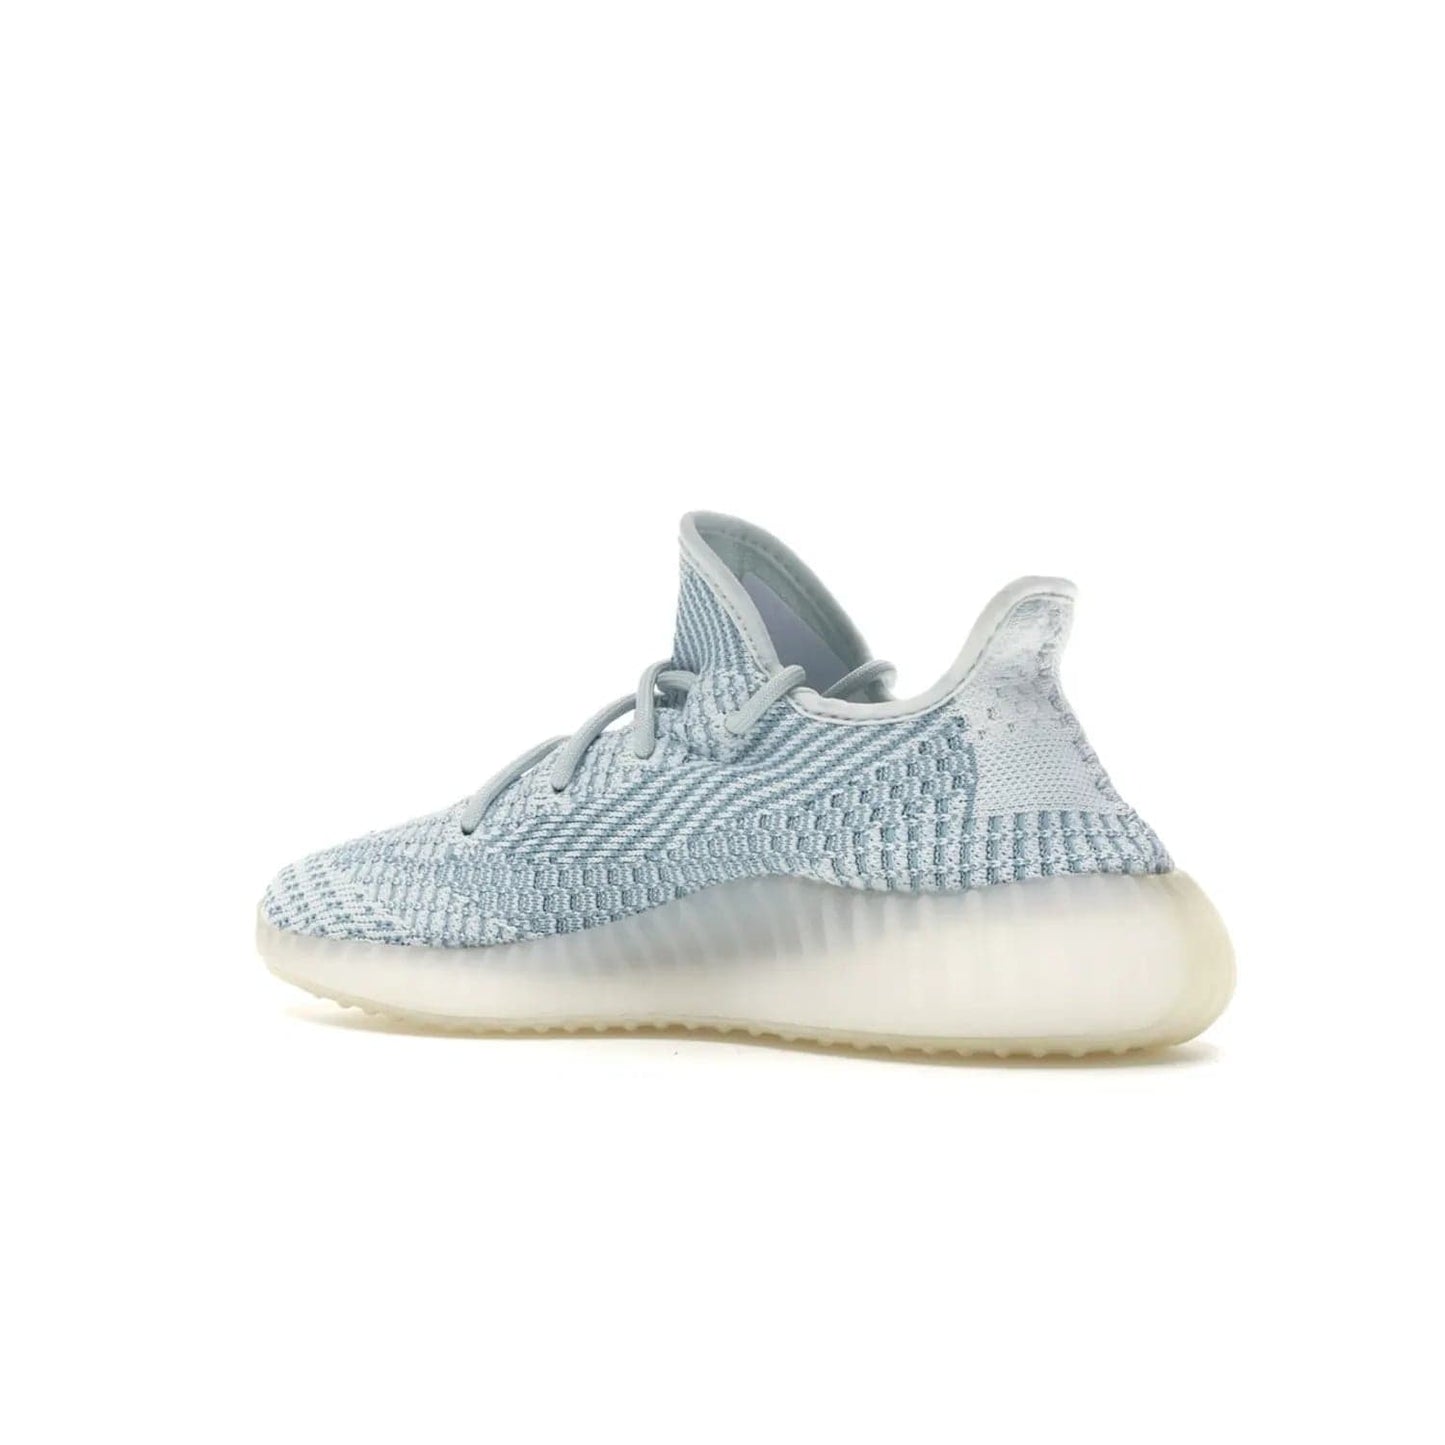 adidas Yeezy Boost 350 V2 Cloud White (Non-Reflective) - Image 22 - Only at www.BallersClubKickz.com - Uniquely designed adidas Yeezy Boost 350 V2 Cloud White (Non-Reflective) with a Primeknit upper in shades of cream and blue with a contrasting hard sole. A fashion-forward sneaker with a transparent strip and blue-and-white patterns.